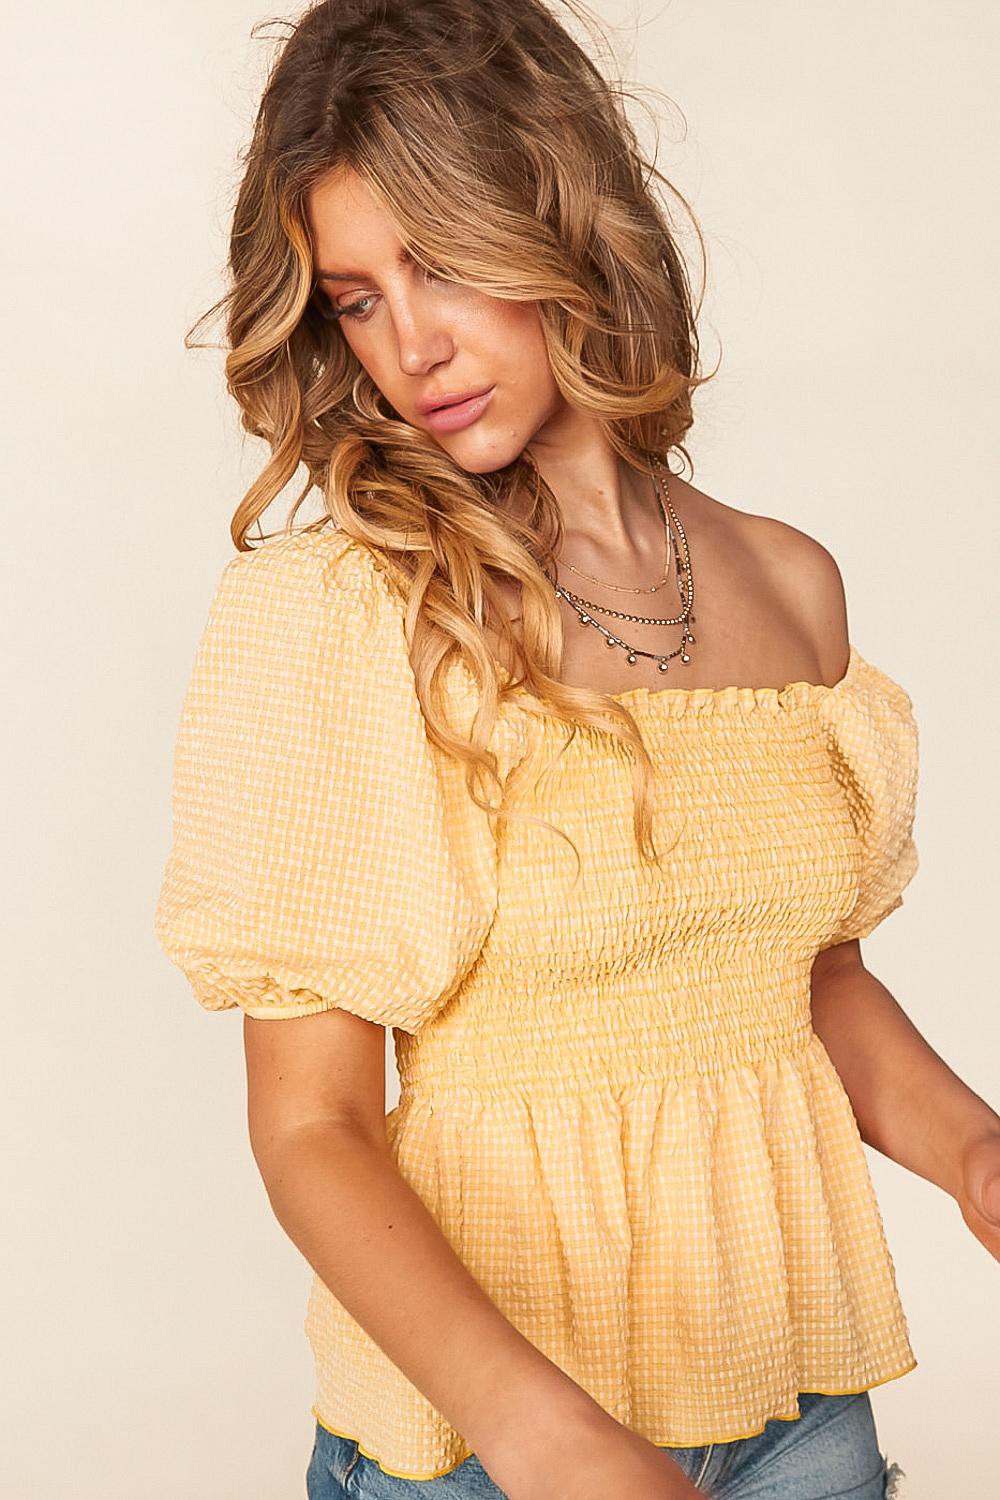 Sunny Days Ahead Smocked Yellow Gingham Top